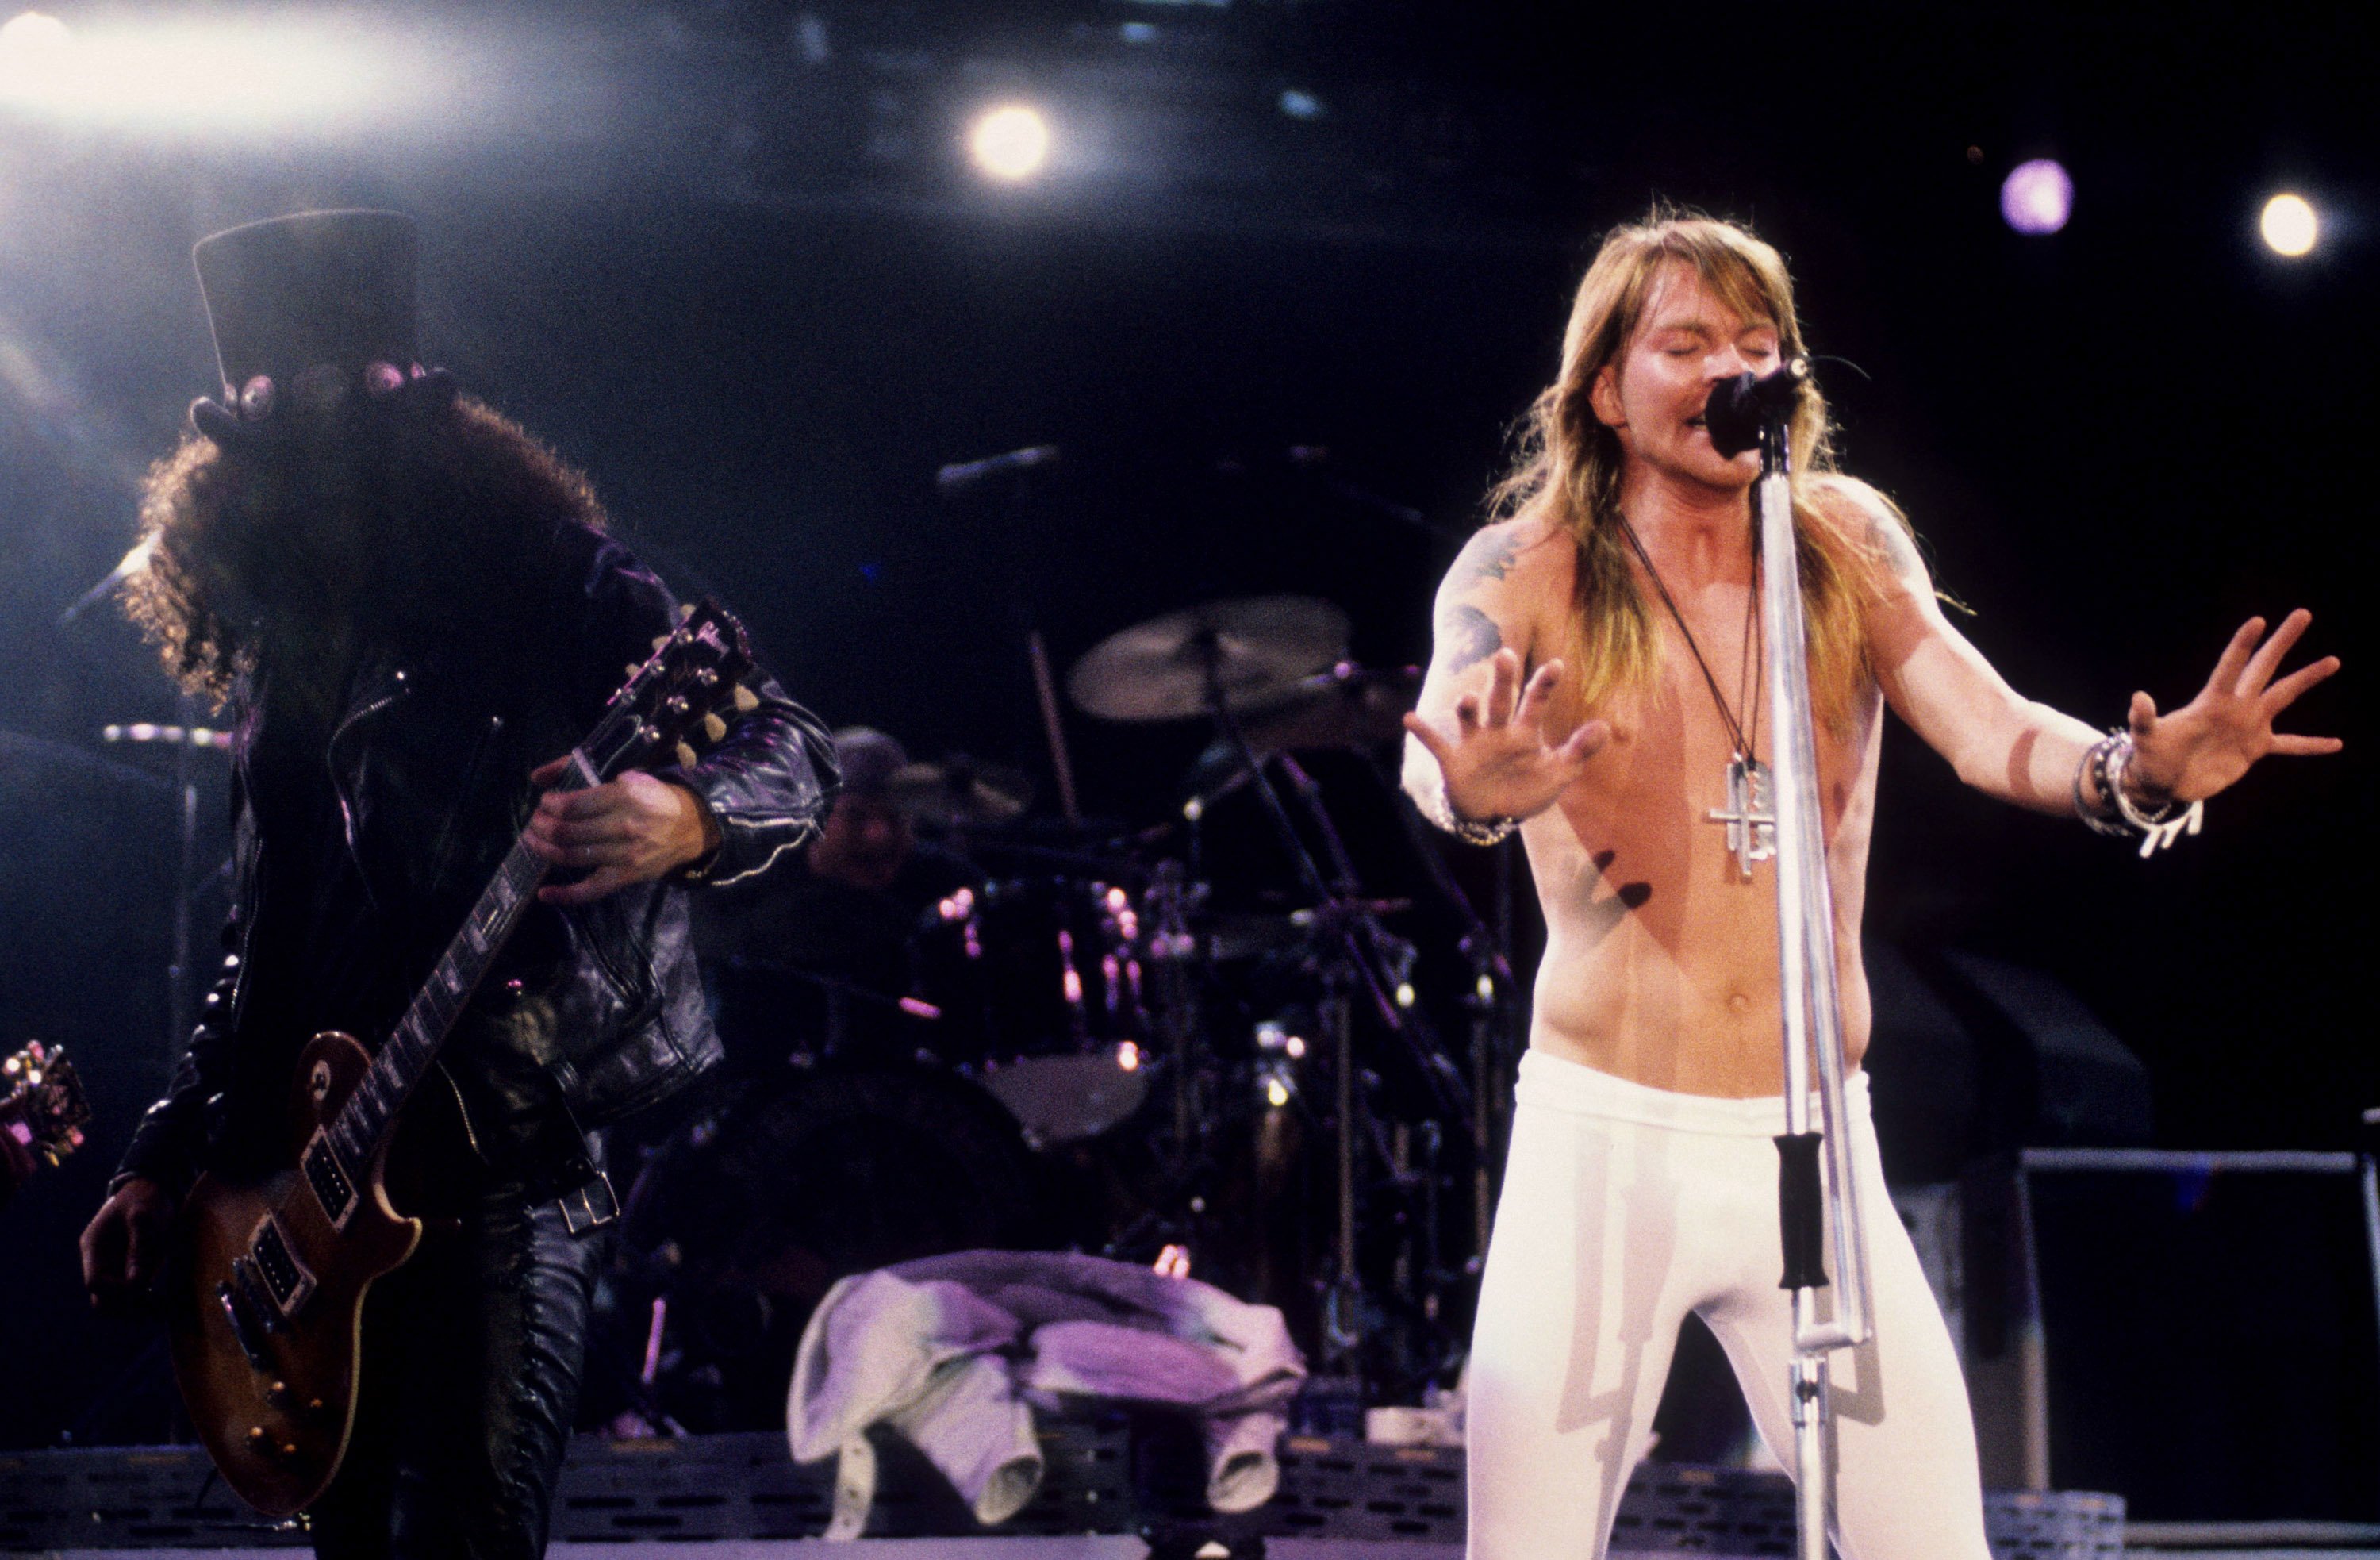 Slash and Axl Rose of Guns N' Roses performing in 1991, the year November Rain came out